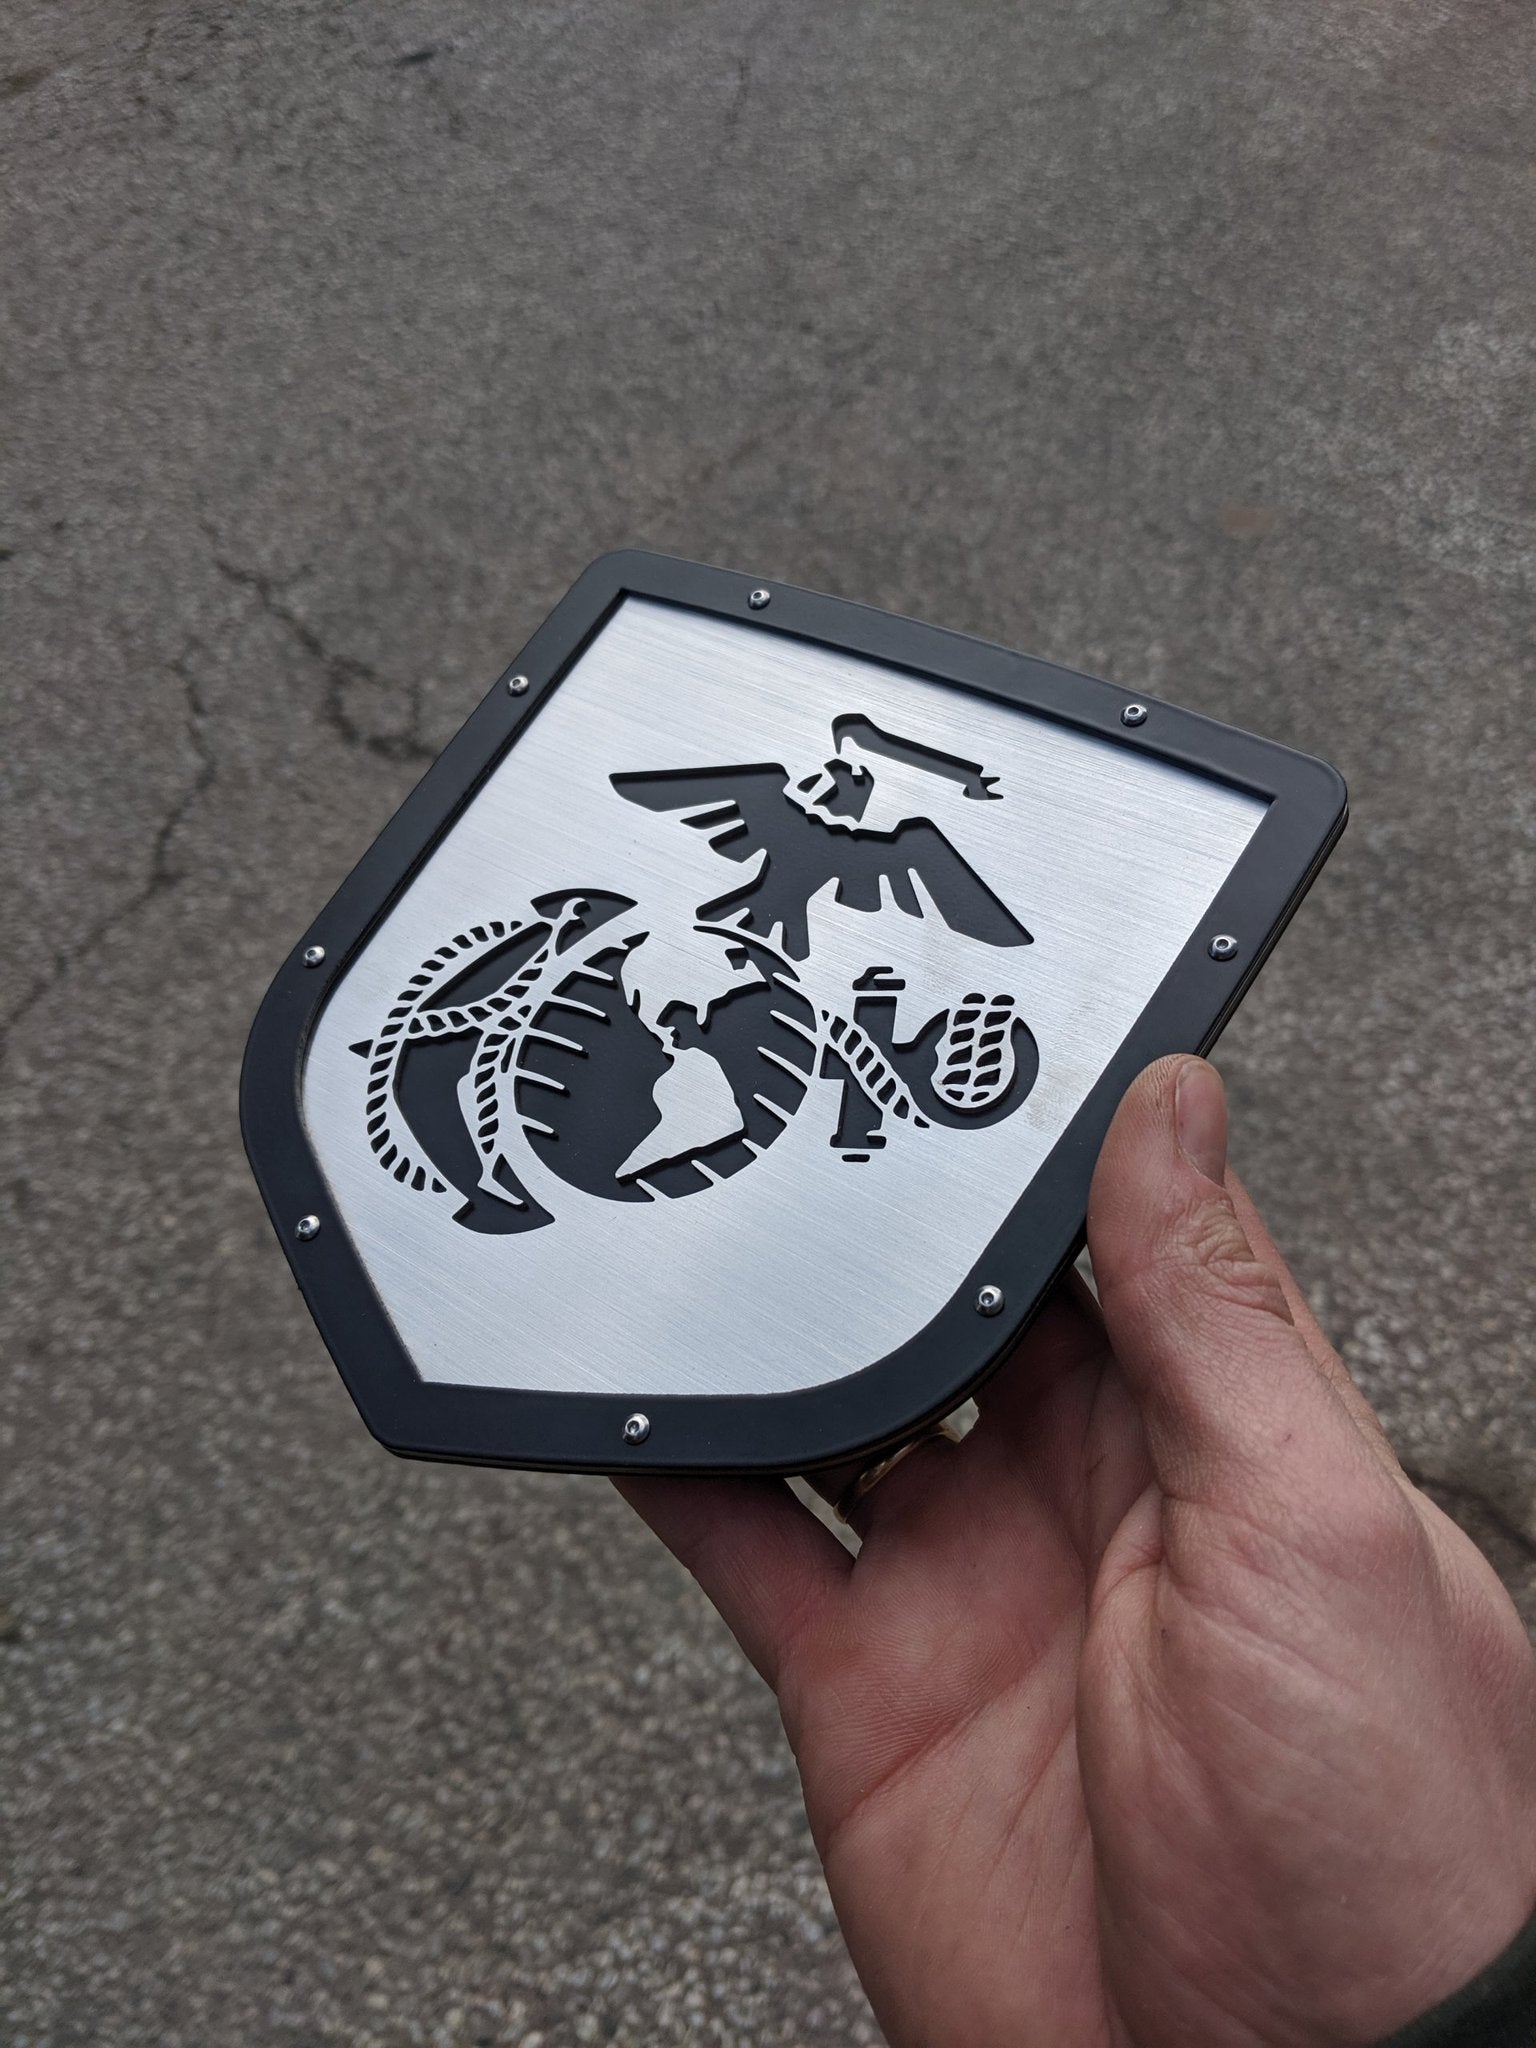 Marine Corps Shield Emblem - RAM® Trucks, Grille and Tailgate - Fits Multiple Models and Years